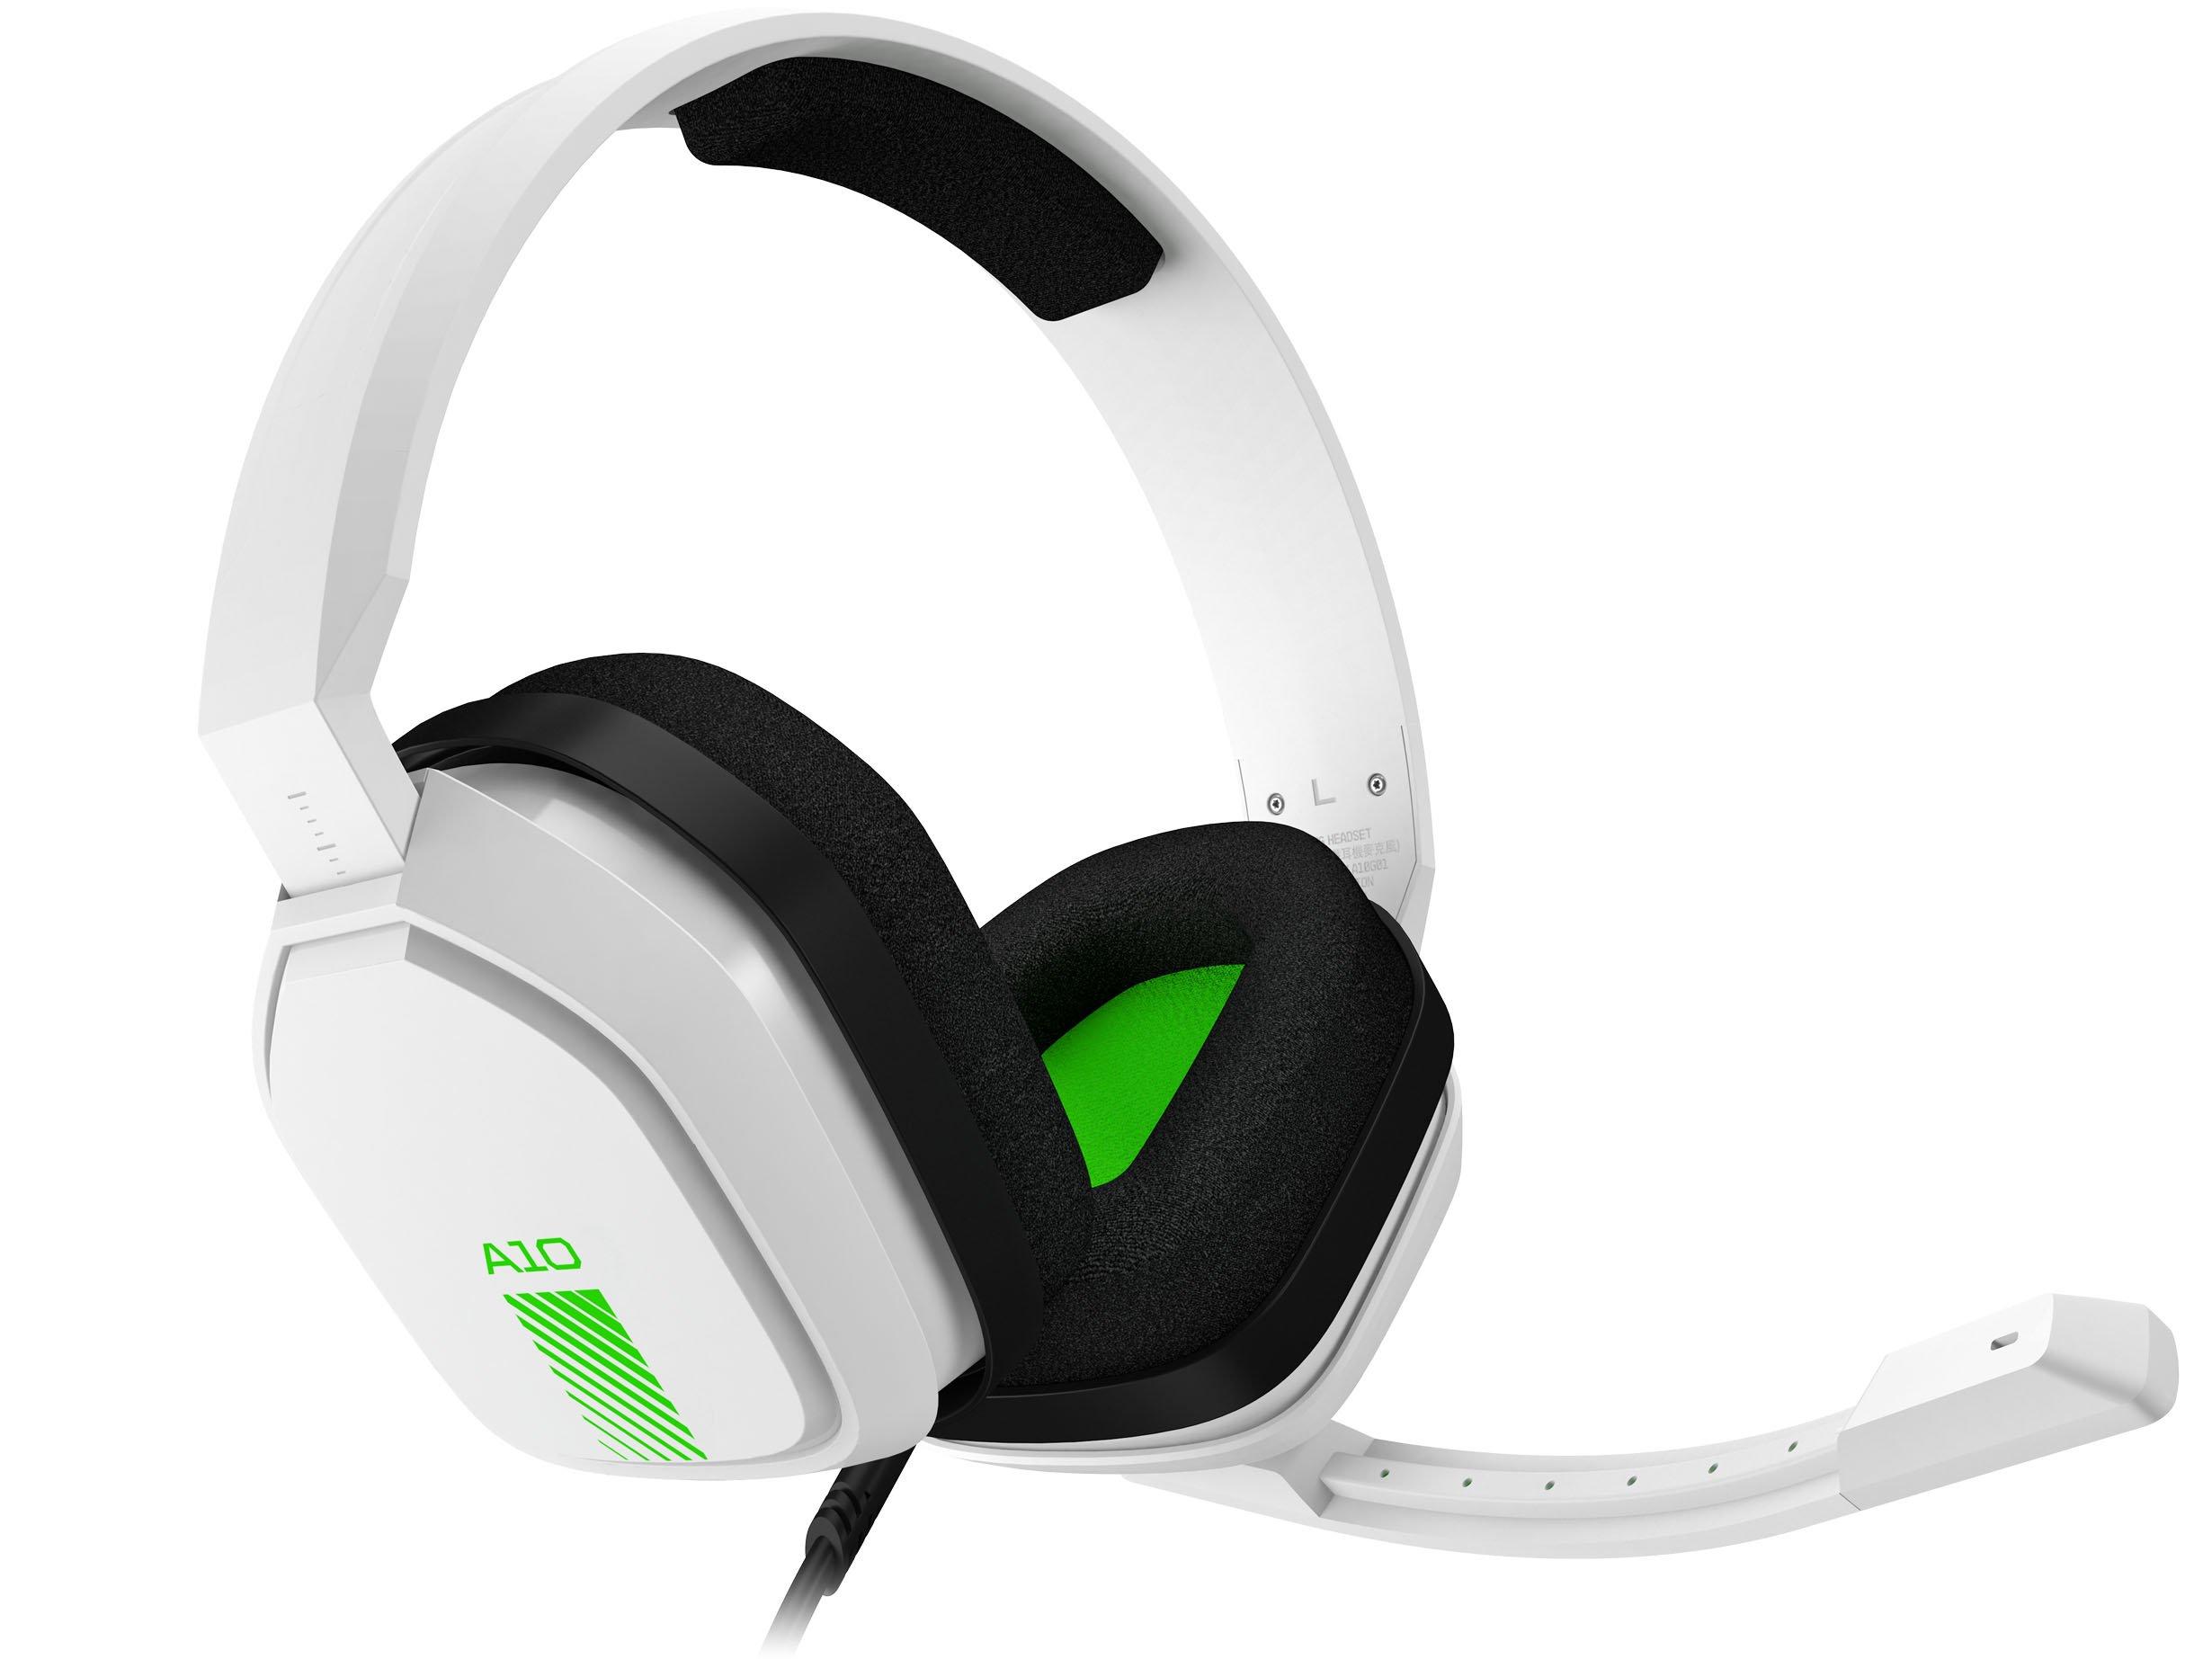 Lelie Genre Tweet Astro Gaming A10 Wired Gaming Headset for Xbox One | GameStop